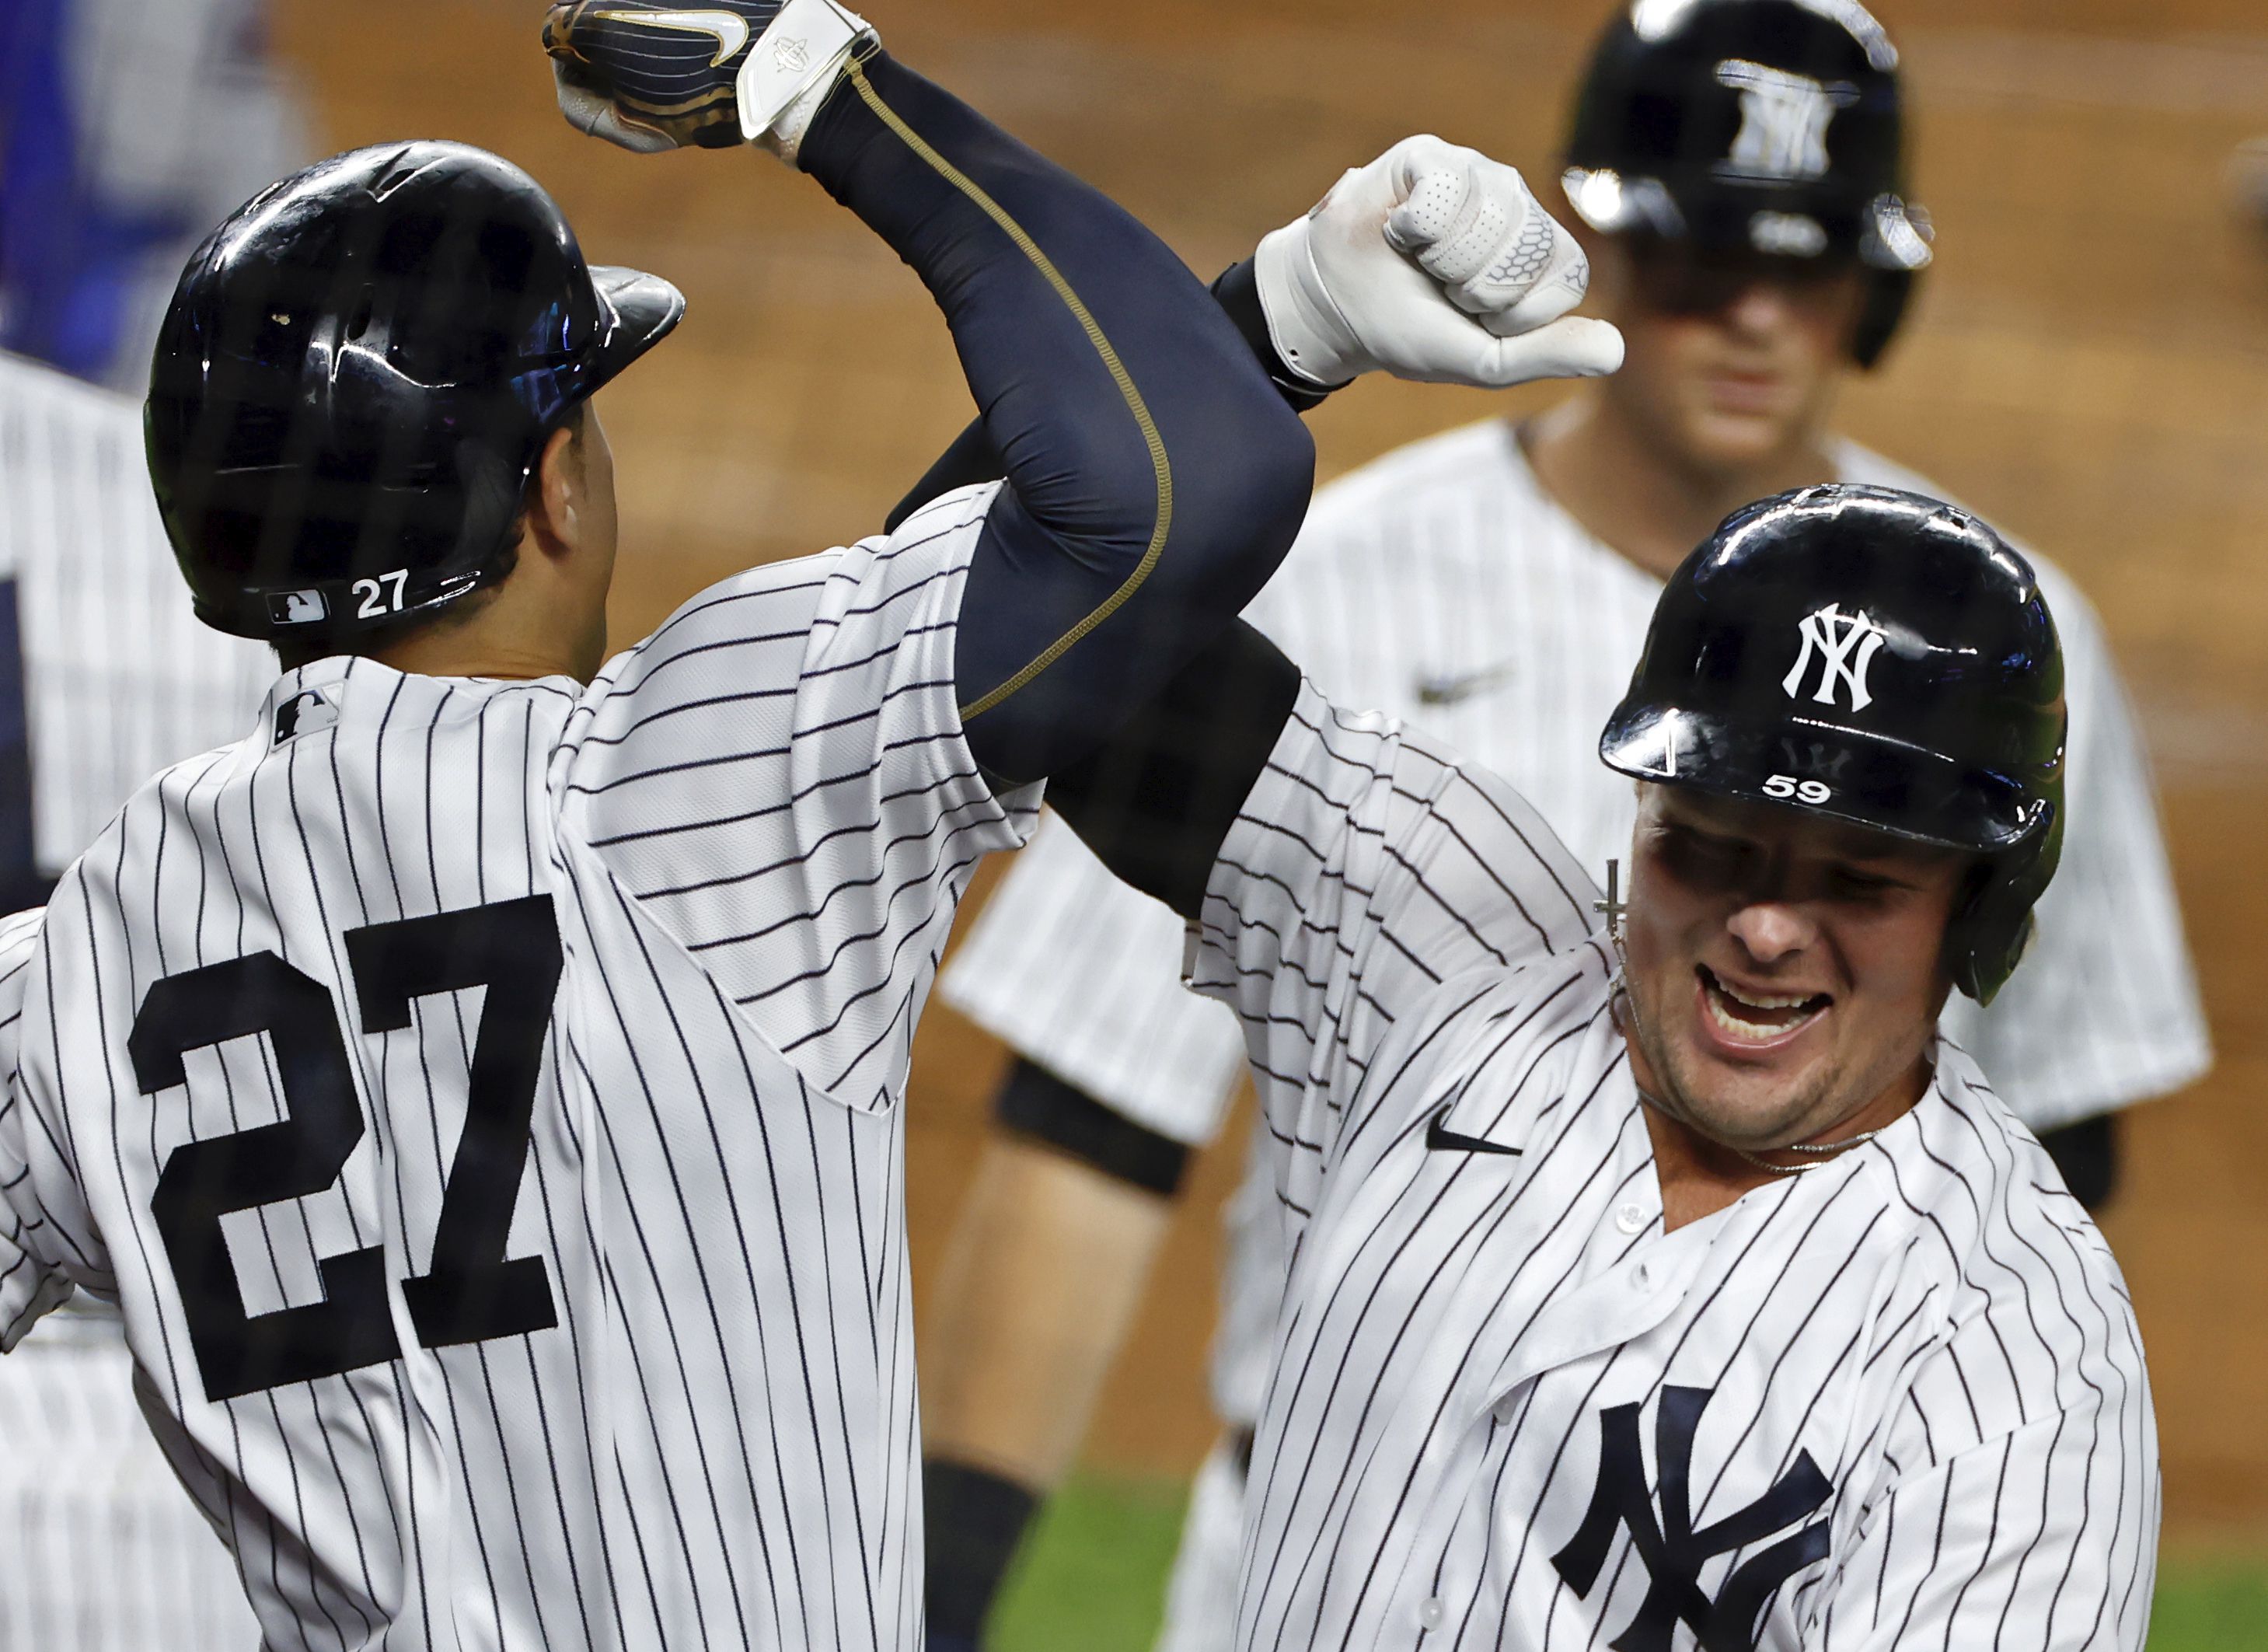 New York Yankees: Clint Frazier hits long home run while wearing mask